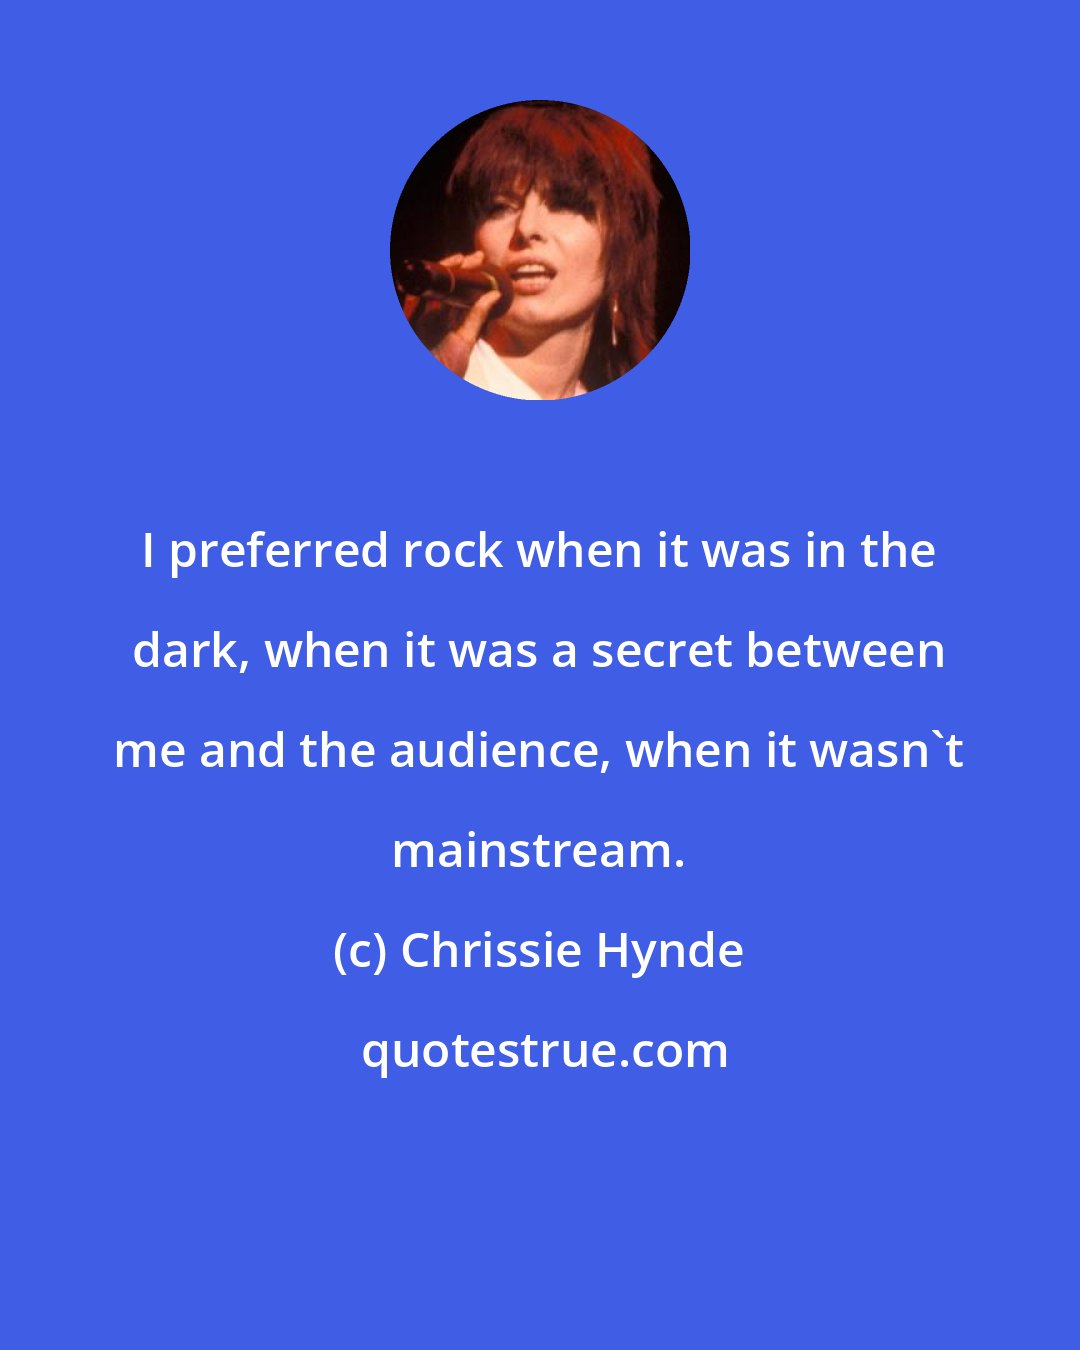 Chrissie Hynde: I preferred rock when it was in the dark, when it was a secret between me and the audience, when it wasn't mainstream.